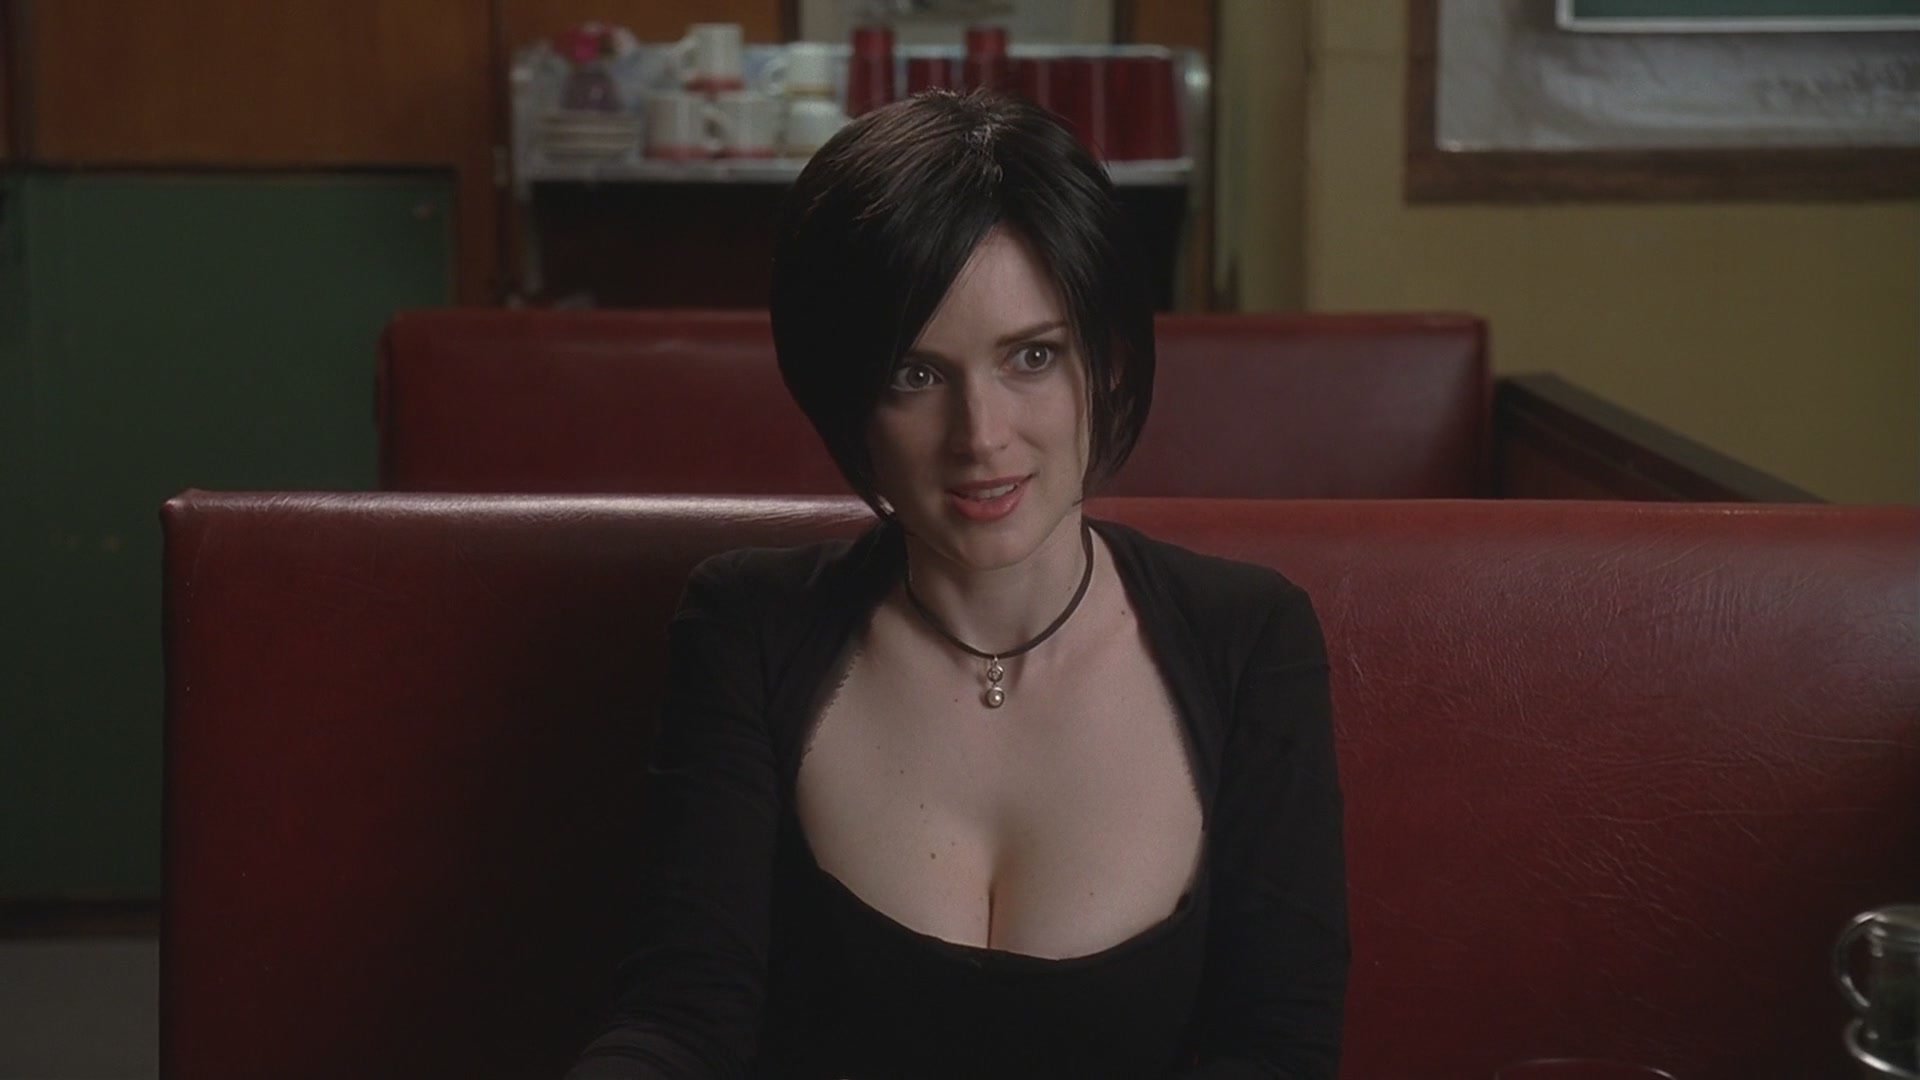 Naked Winona Ryder In Sex And Death 101